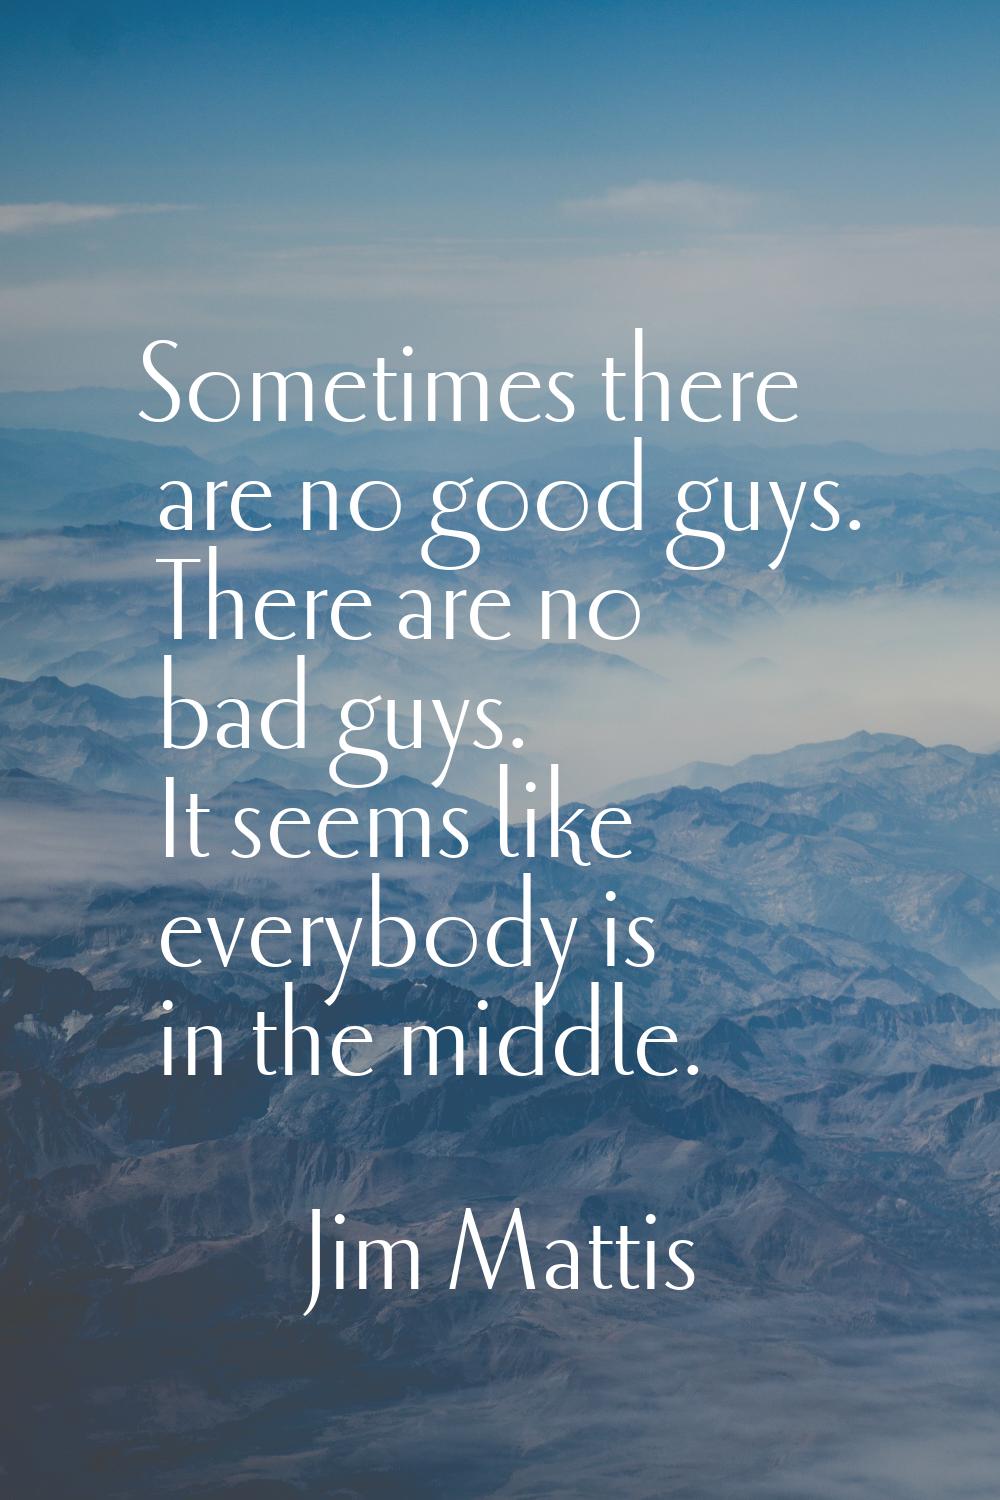 Sometimes there are no good guys. There are no bad guys. It seems like everybody is in the middle.